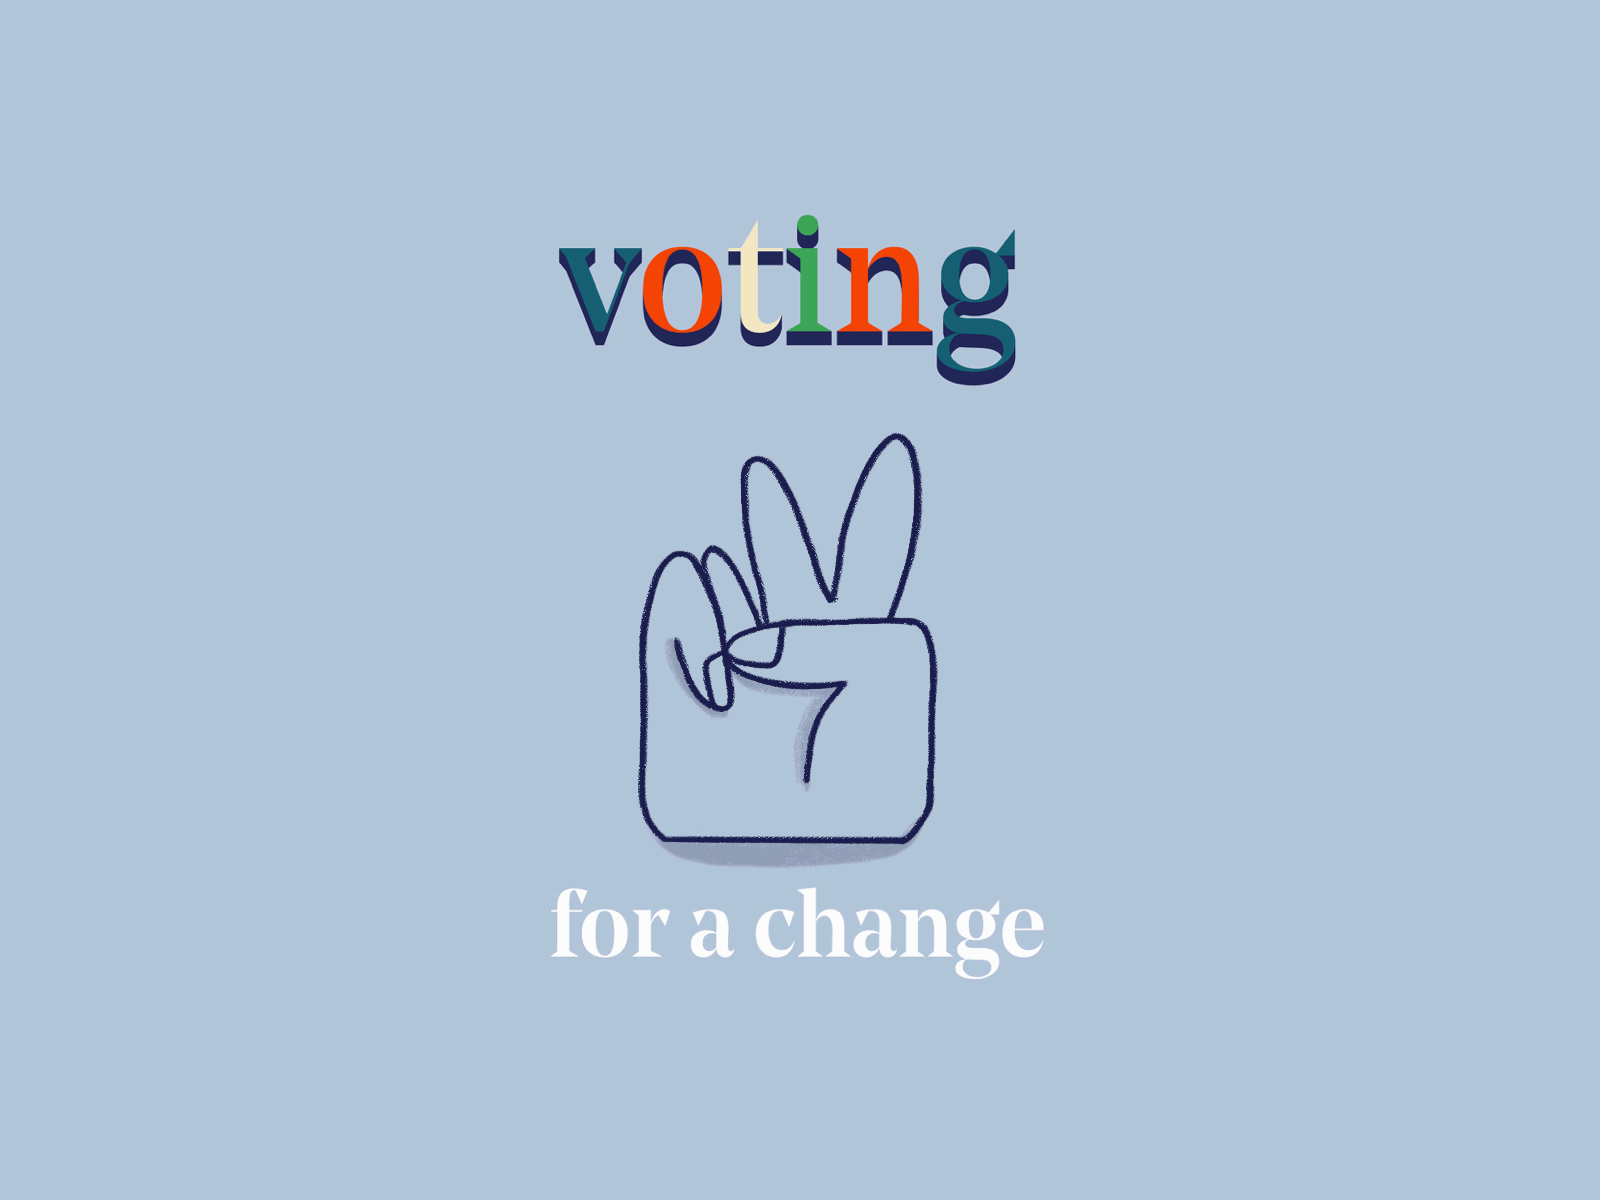 Hoping and Voting design election hope illustration peace peace sign procreate vector illustration vote vote2020